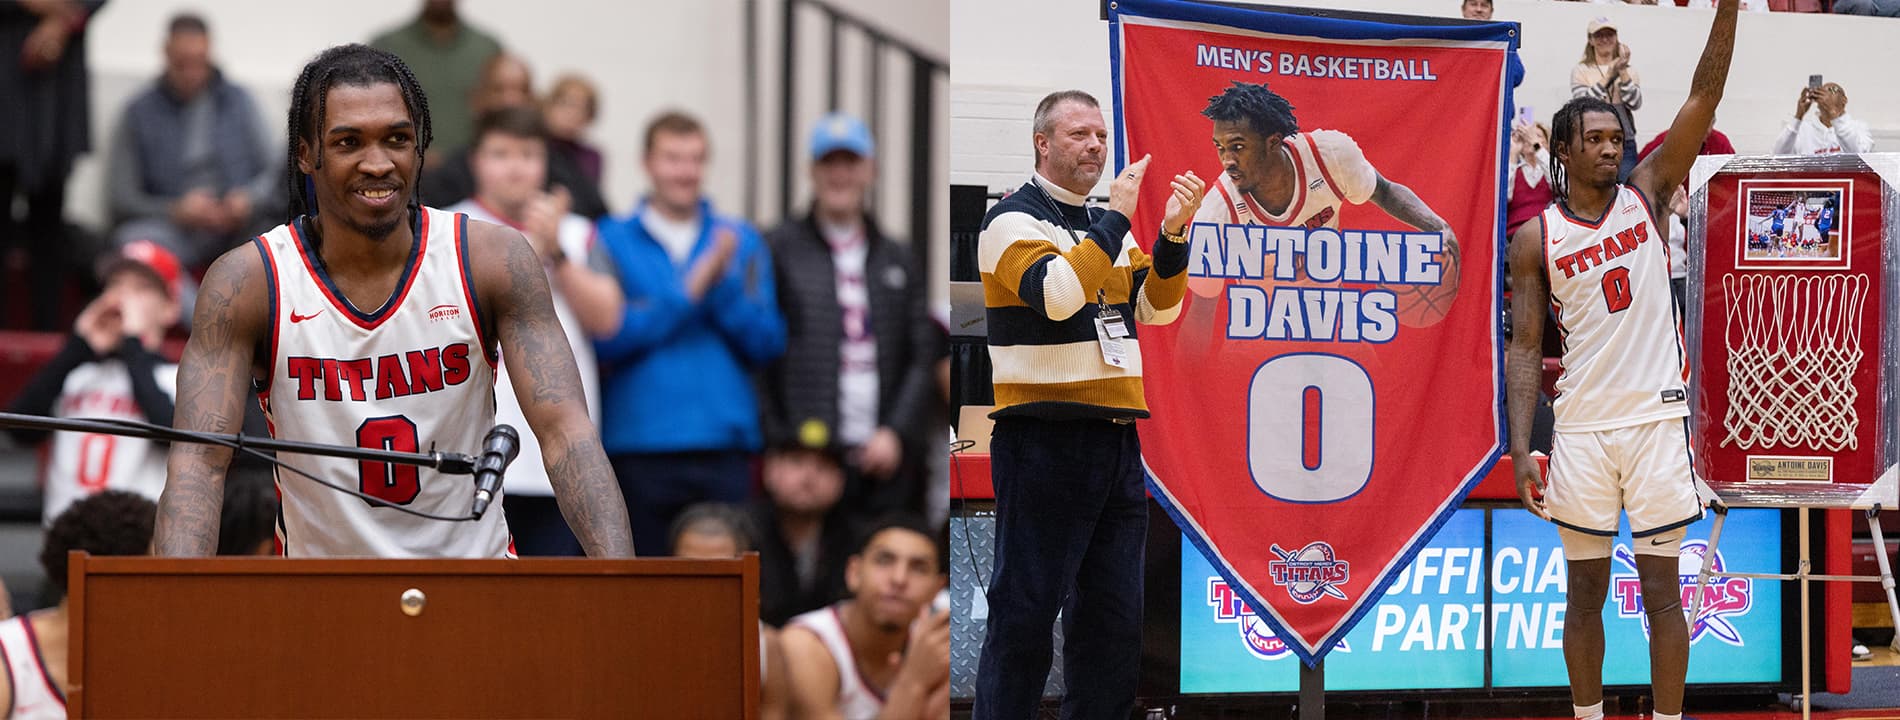 Antoine Davis speaks from a podium indoors at left, with sitting people behind him. President Donald Taylor, left and Antoine Davis stand next to a large banner reading 'Men's Basketball, Antoine Davis, 0' with another frame holding a picture of Davis, a basketball net and a plaque with his name on it. Davis wears a Titans #0 jersey and holds up his hand, waving.